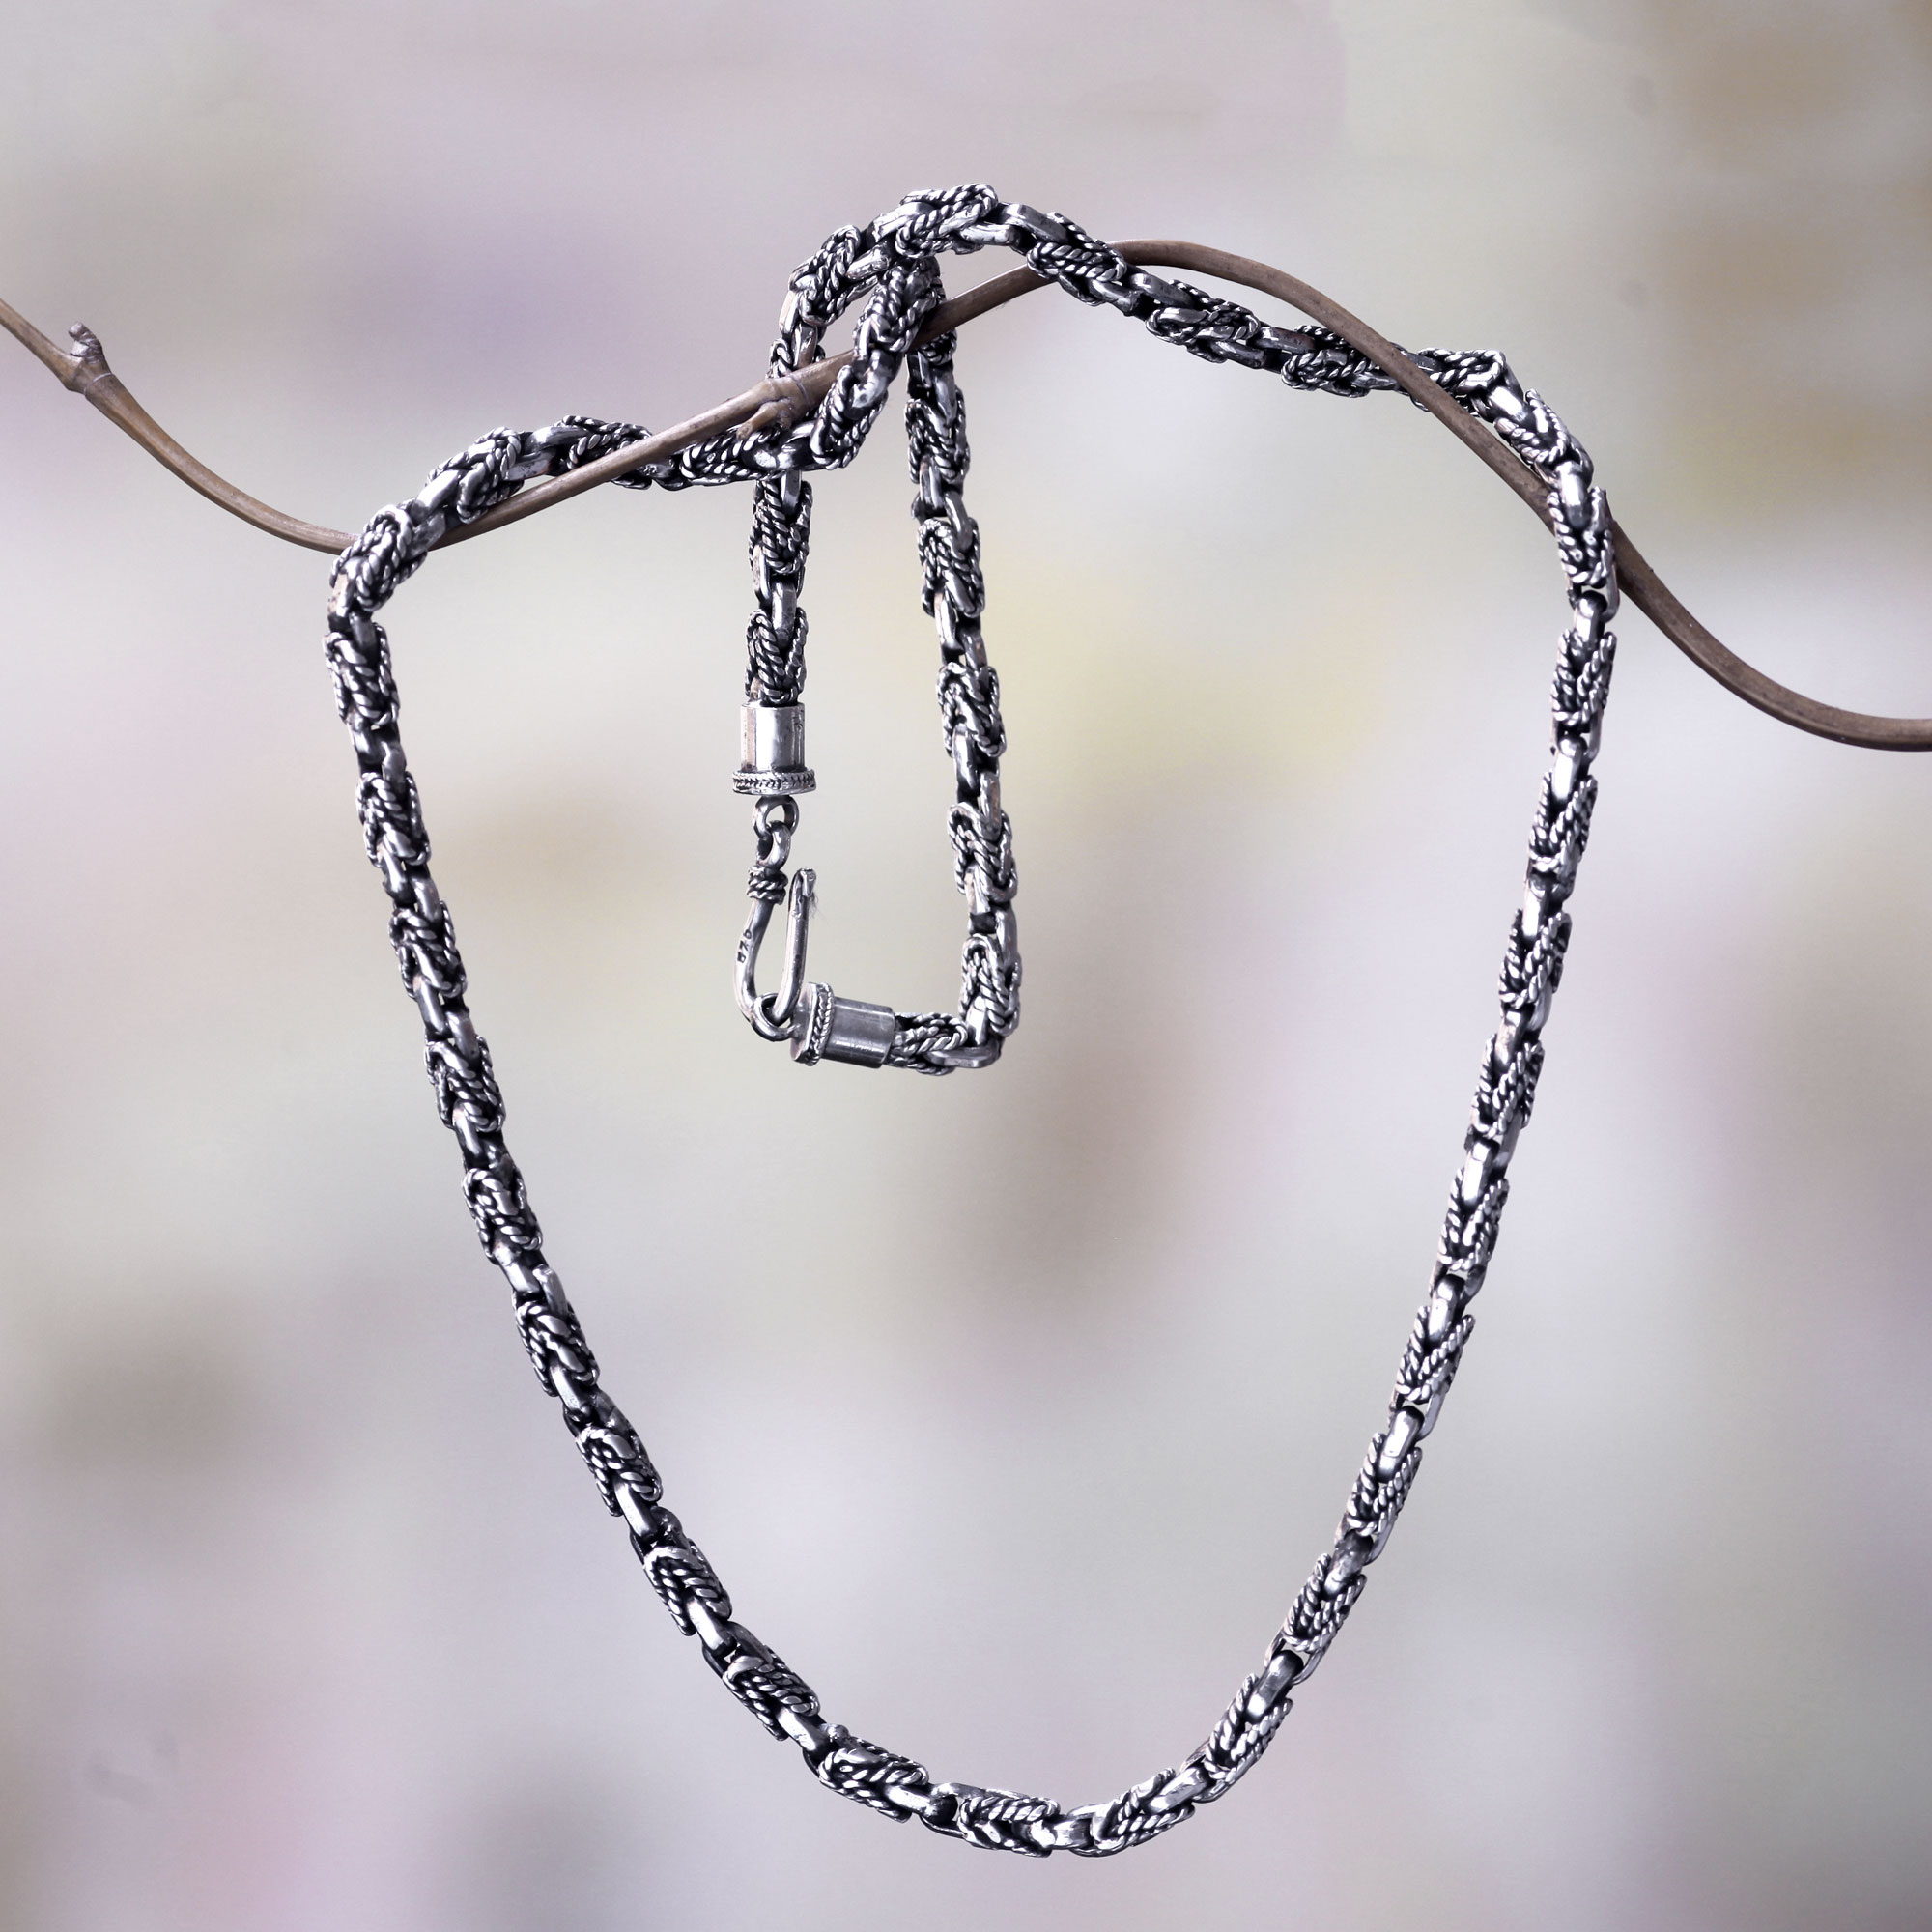 Handcrafted Sterling Silver Chain Necklace from Bali - Black Python